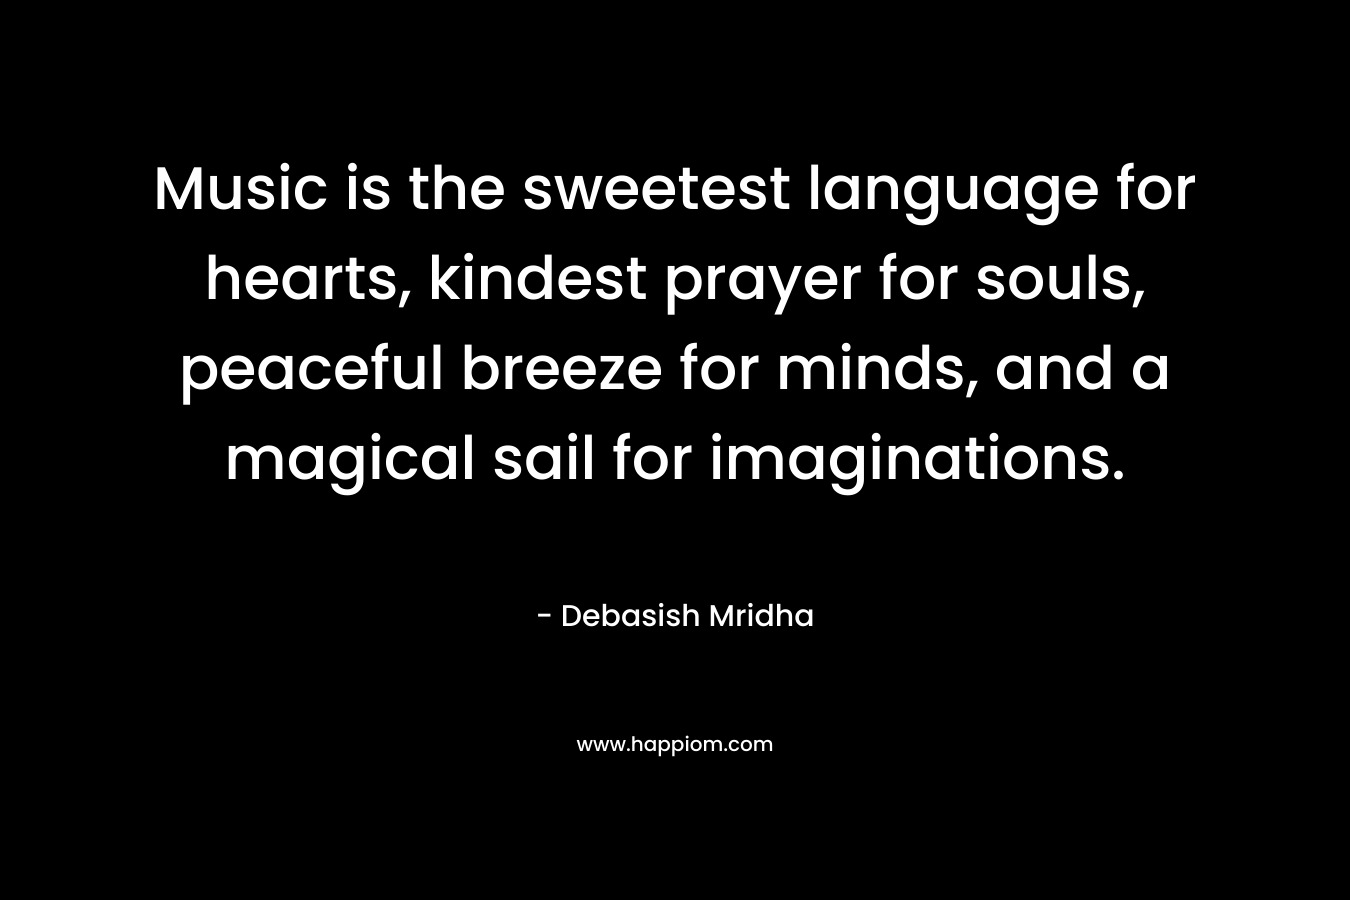 Music is the sweetest language for hearts, kindest prayer for souls, peaceful breeze for minds, and a magical sail for imaginations.